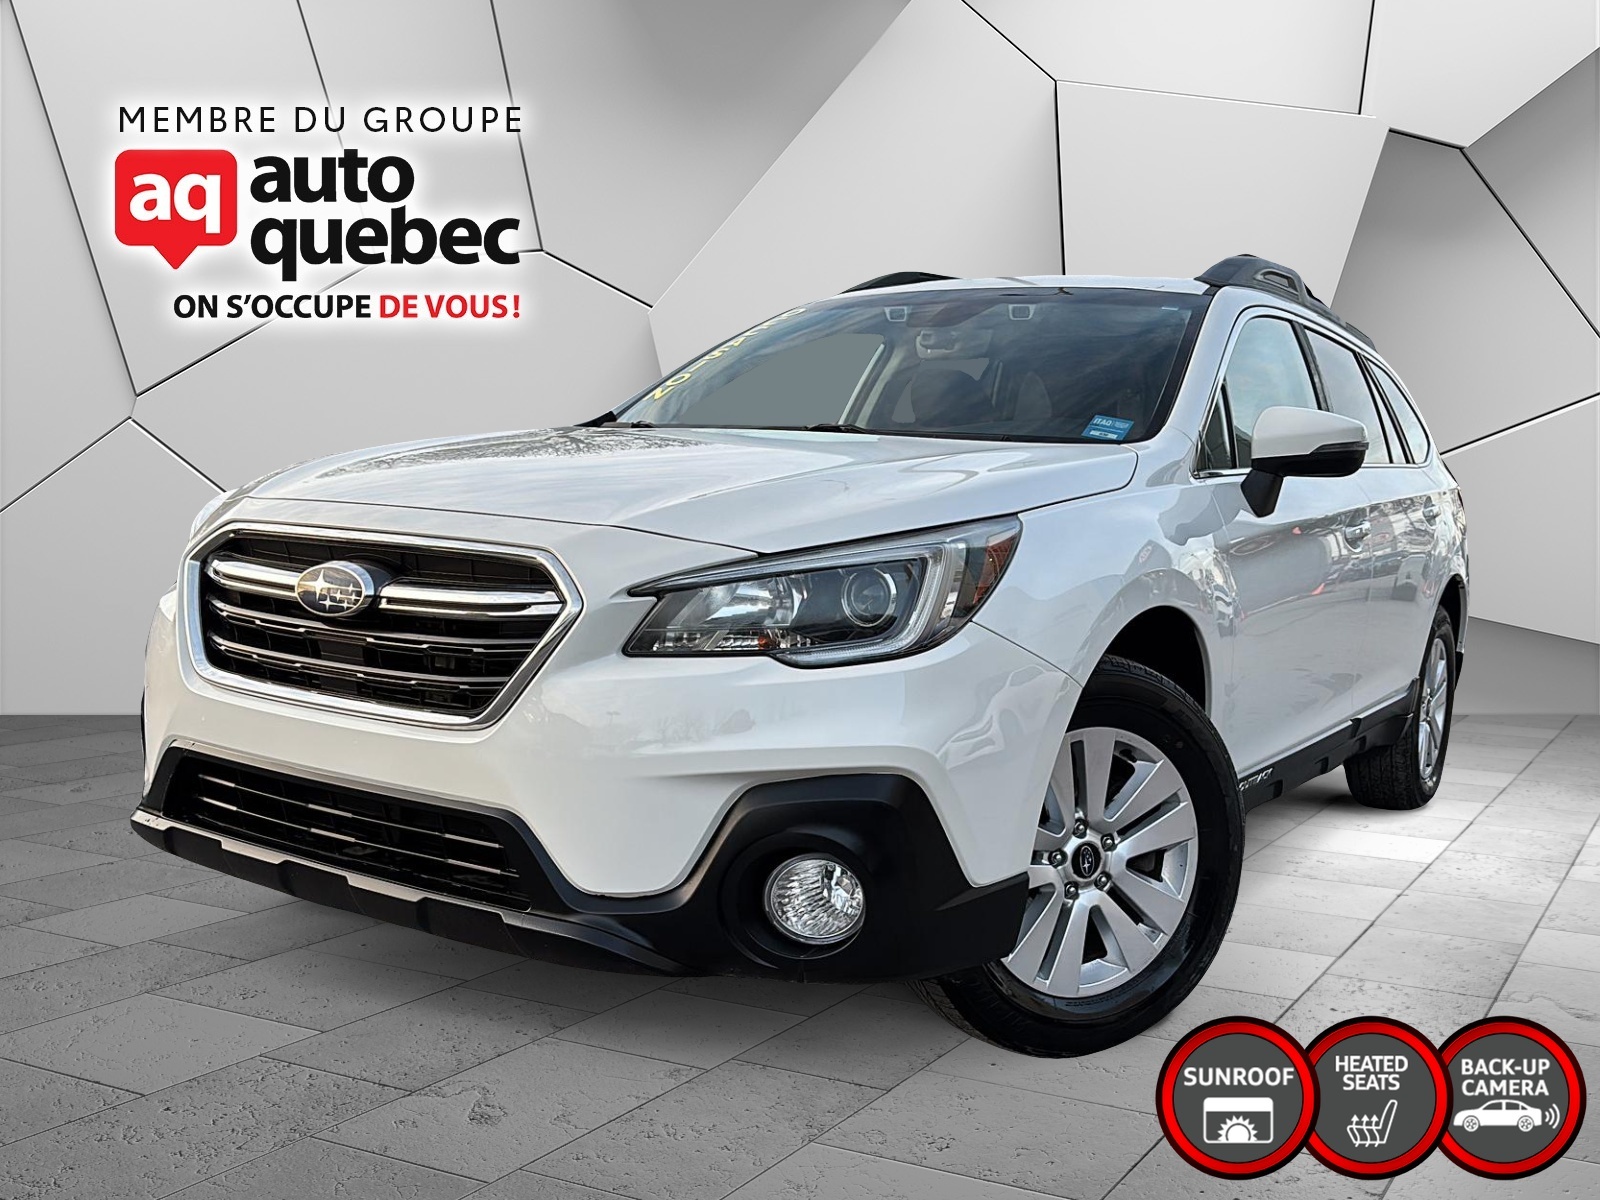 2019 Subaru Outback 2.5i Touring Toit ouvrant Mags Caméra Bluetooth 